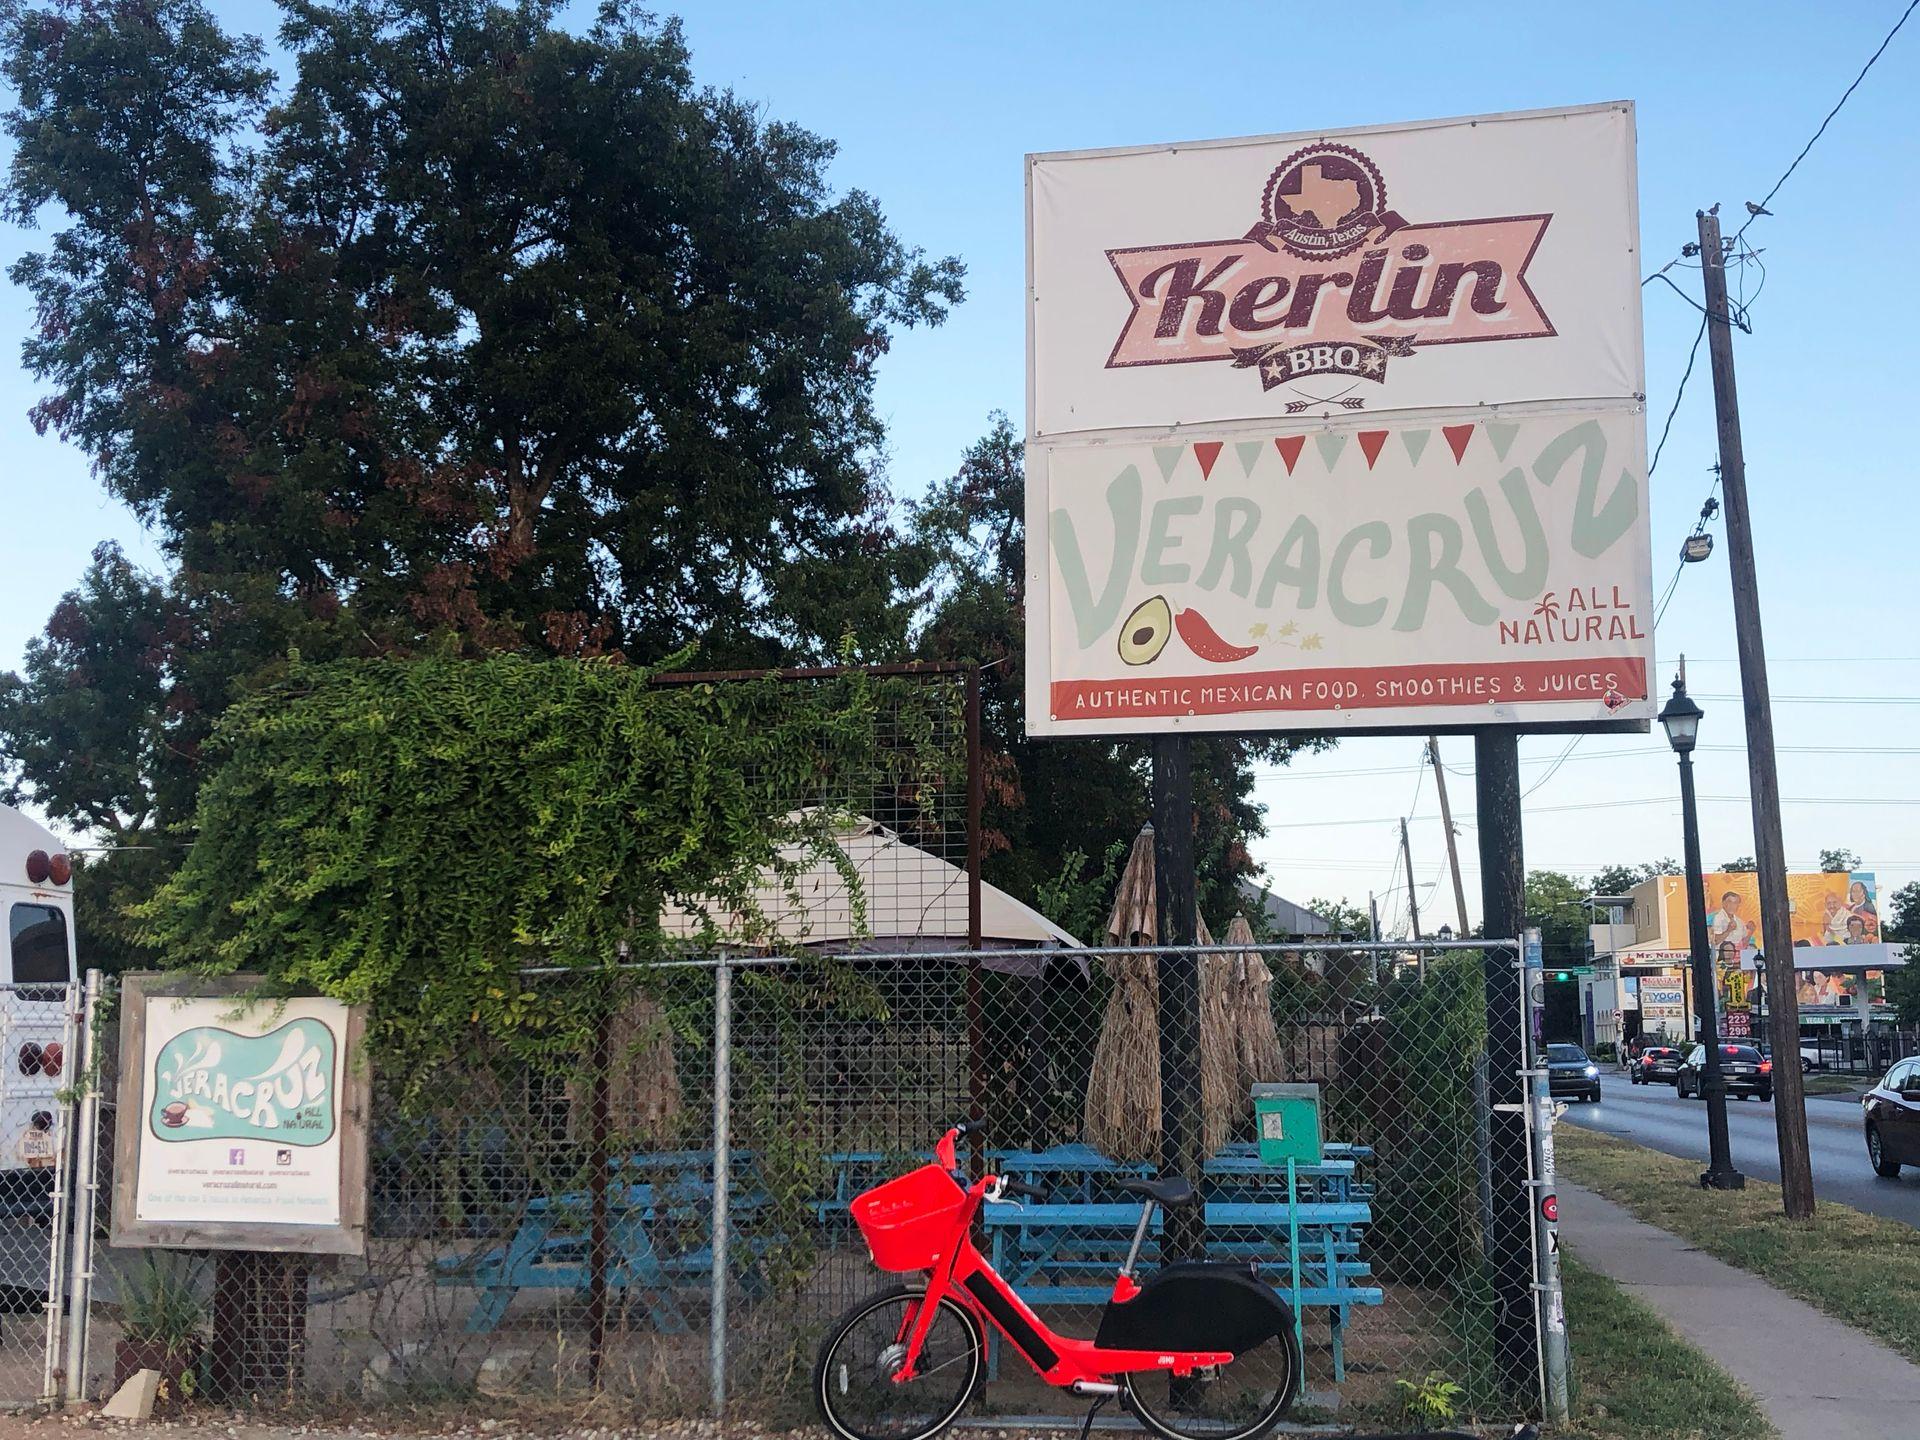 The sign at the oldest location of Veracruz Tacos